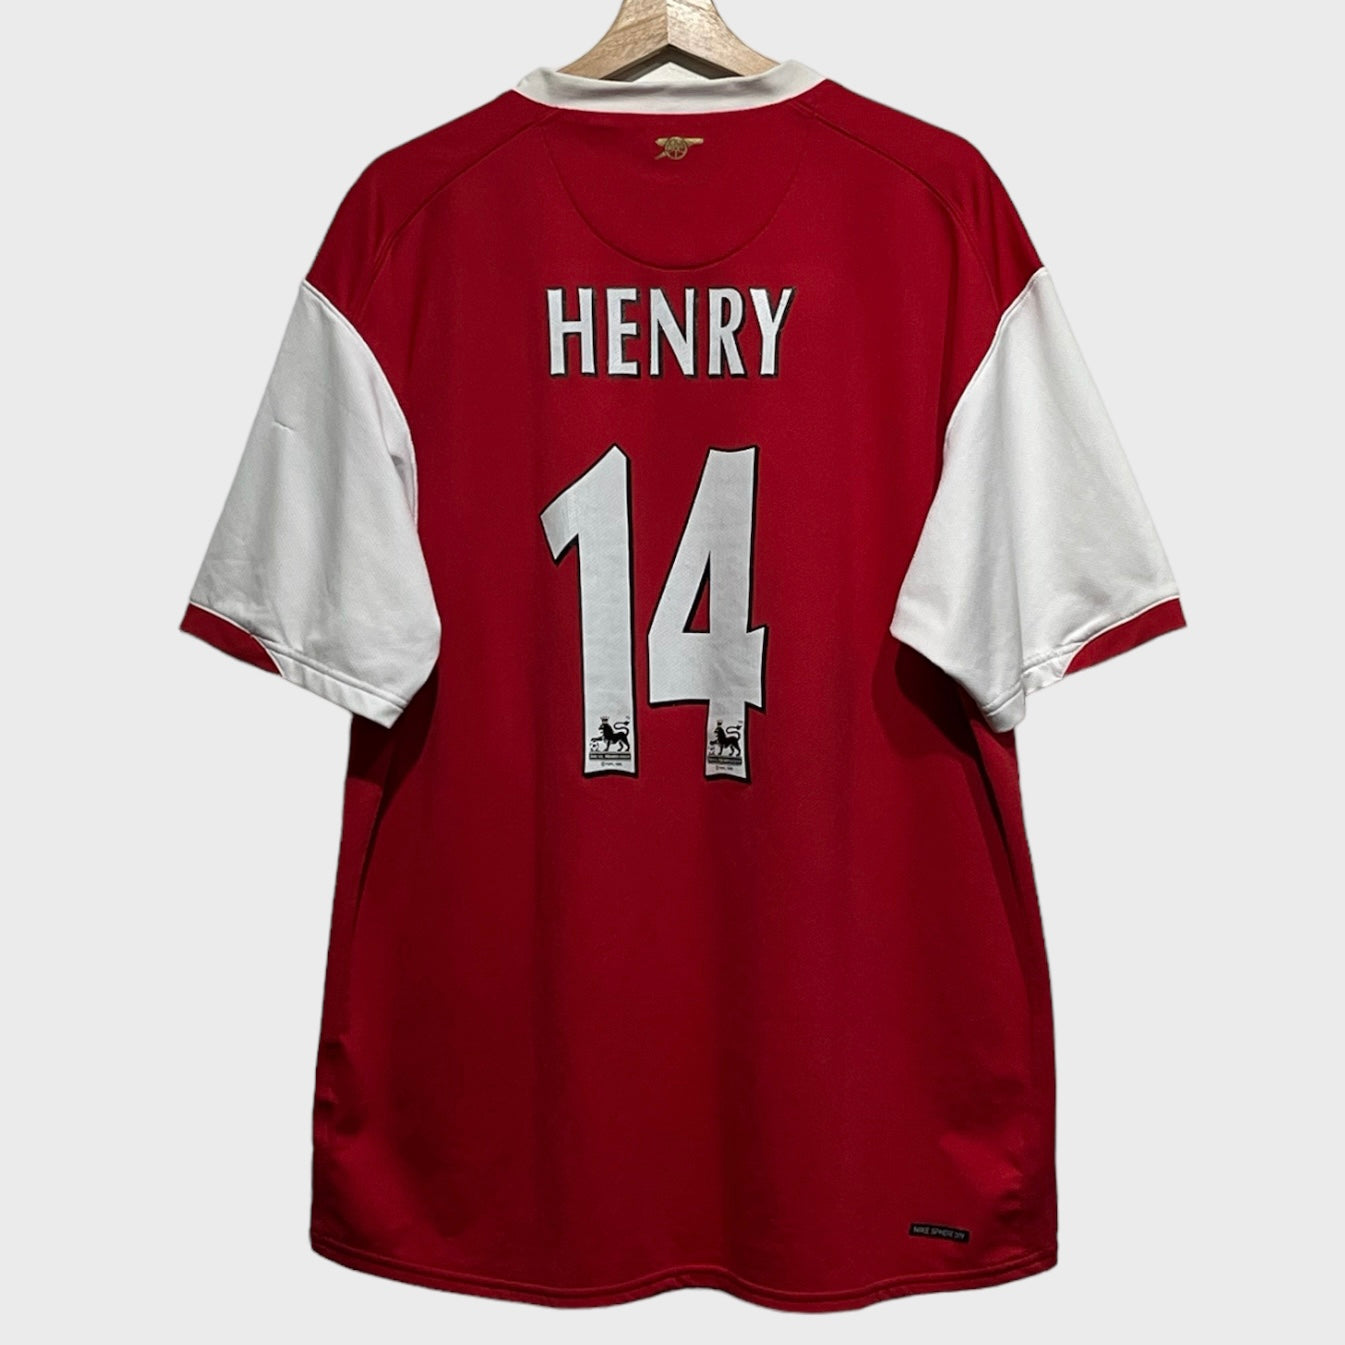 2006/08 Thierry Henry Arsenal Gunners Home Jersey 2XL